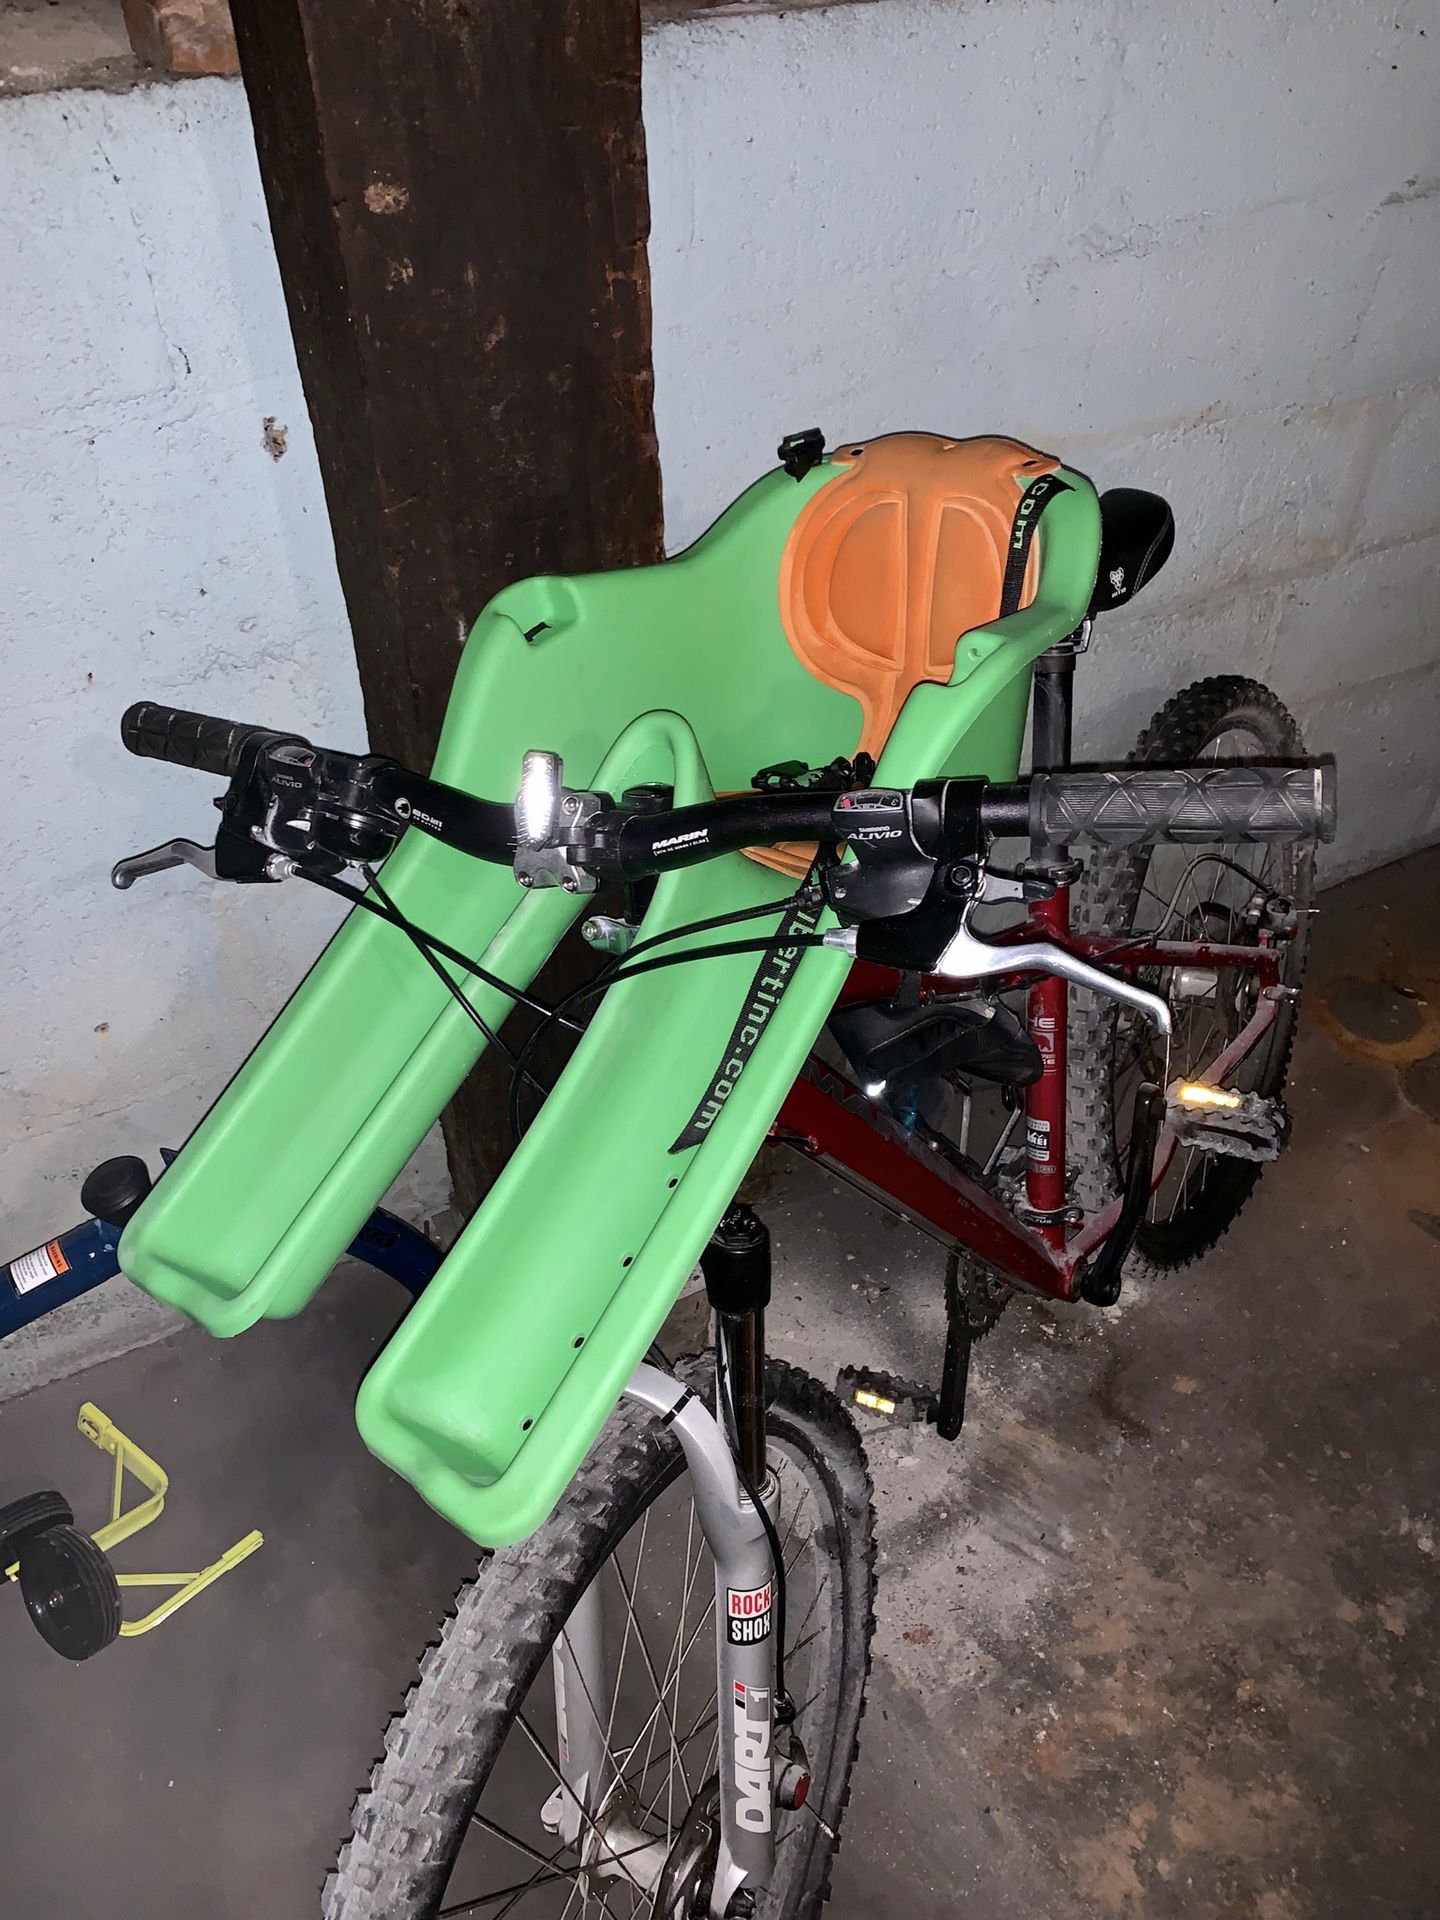 Ibert child safe-t-seat attaches front of adult bike